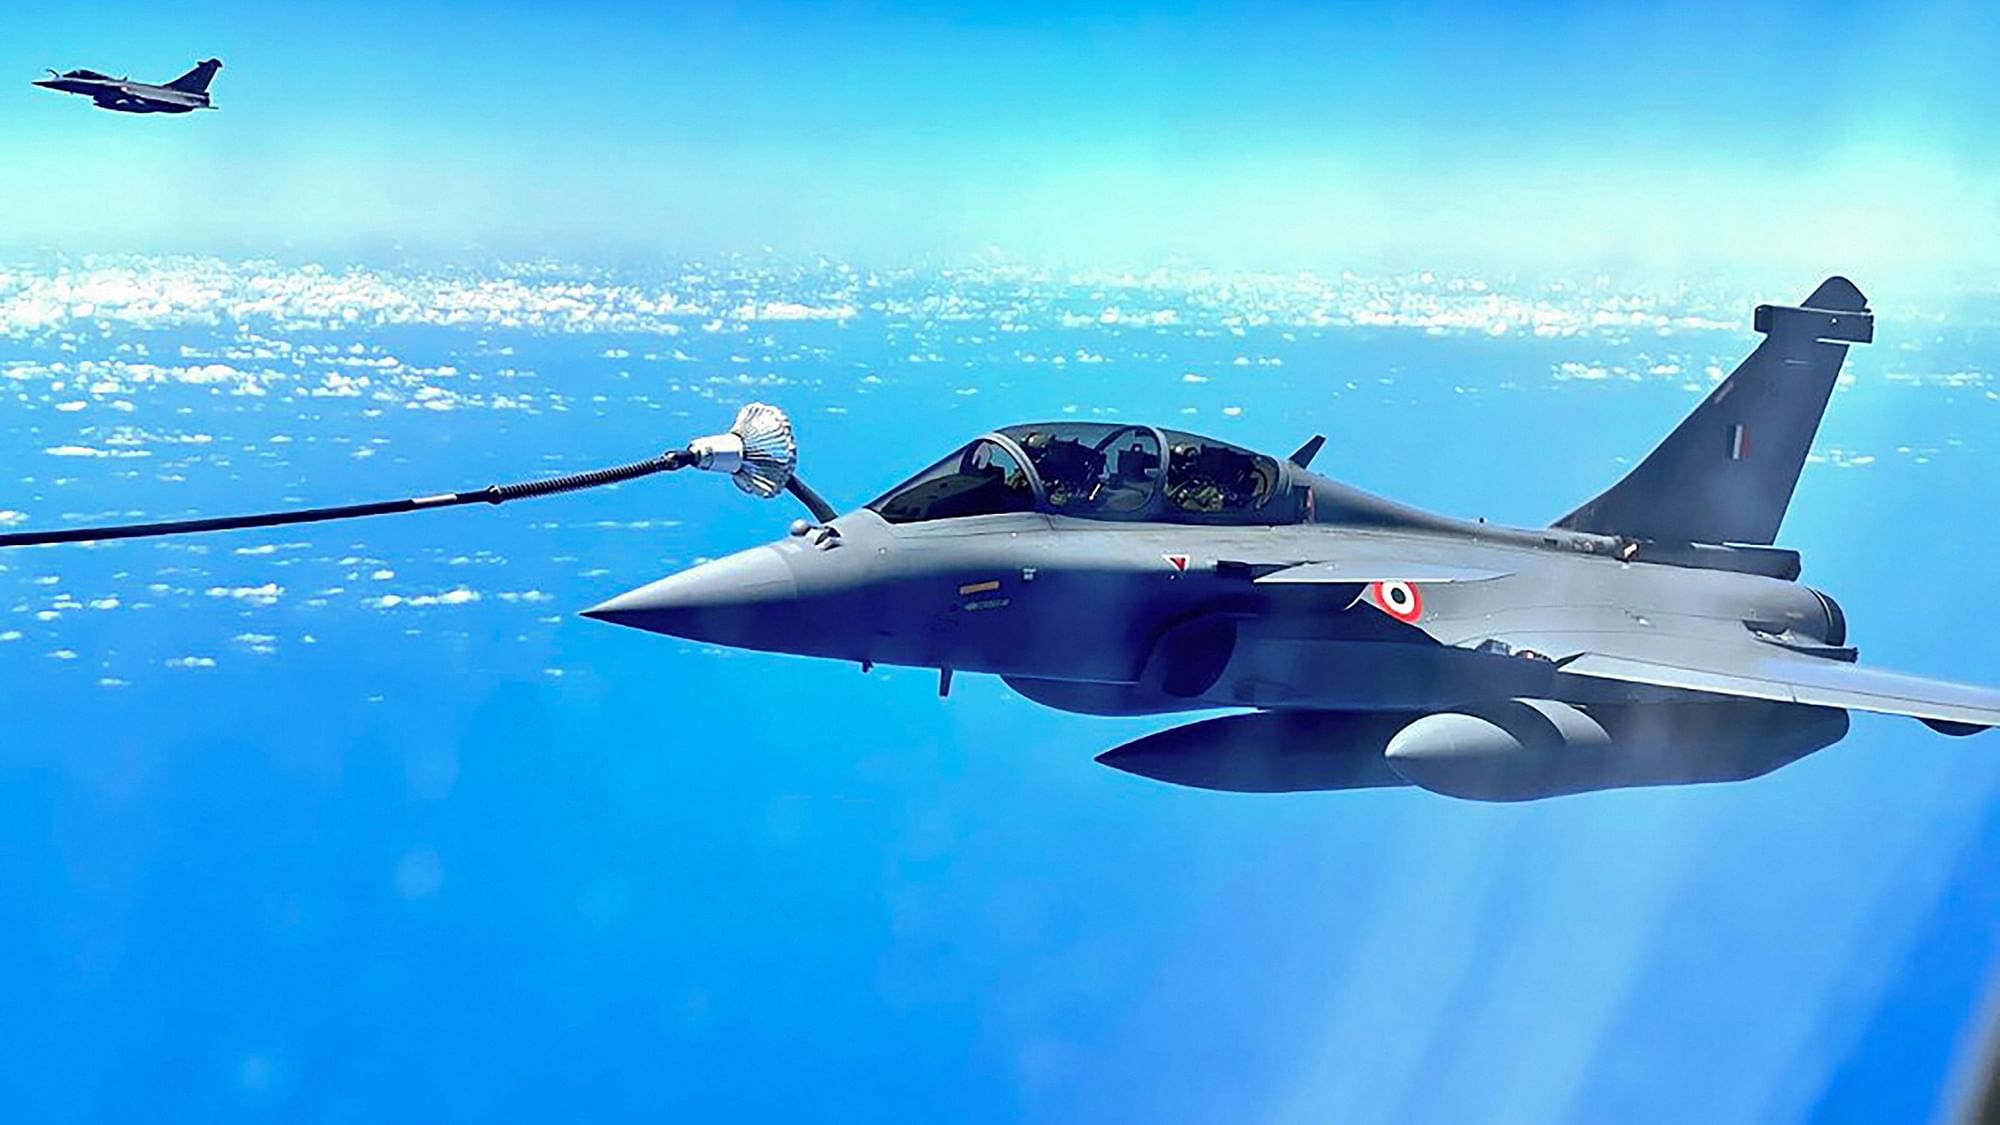 Images of IAF’s Rafale fighter jets, being refuelled mid-air en route Ambala.